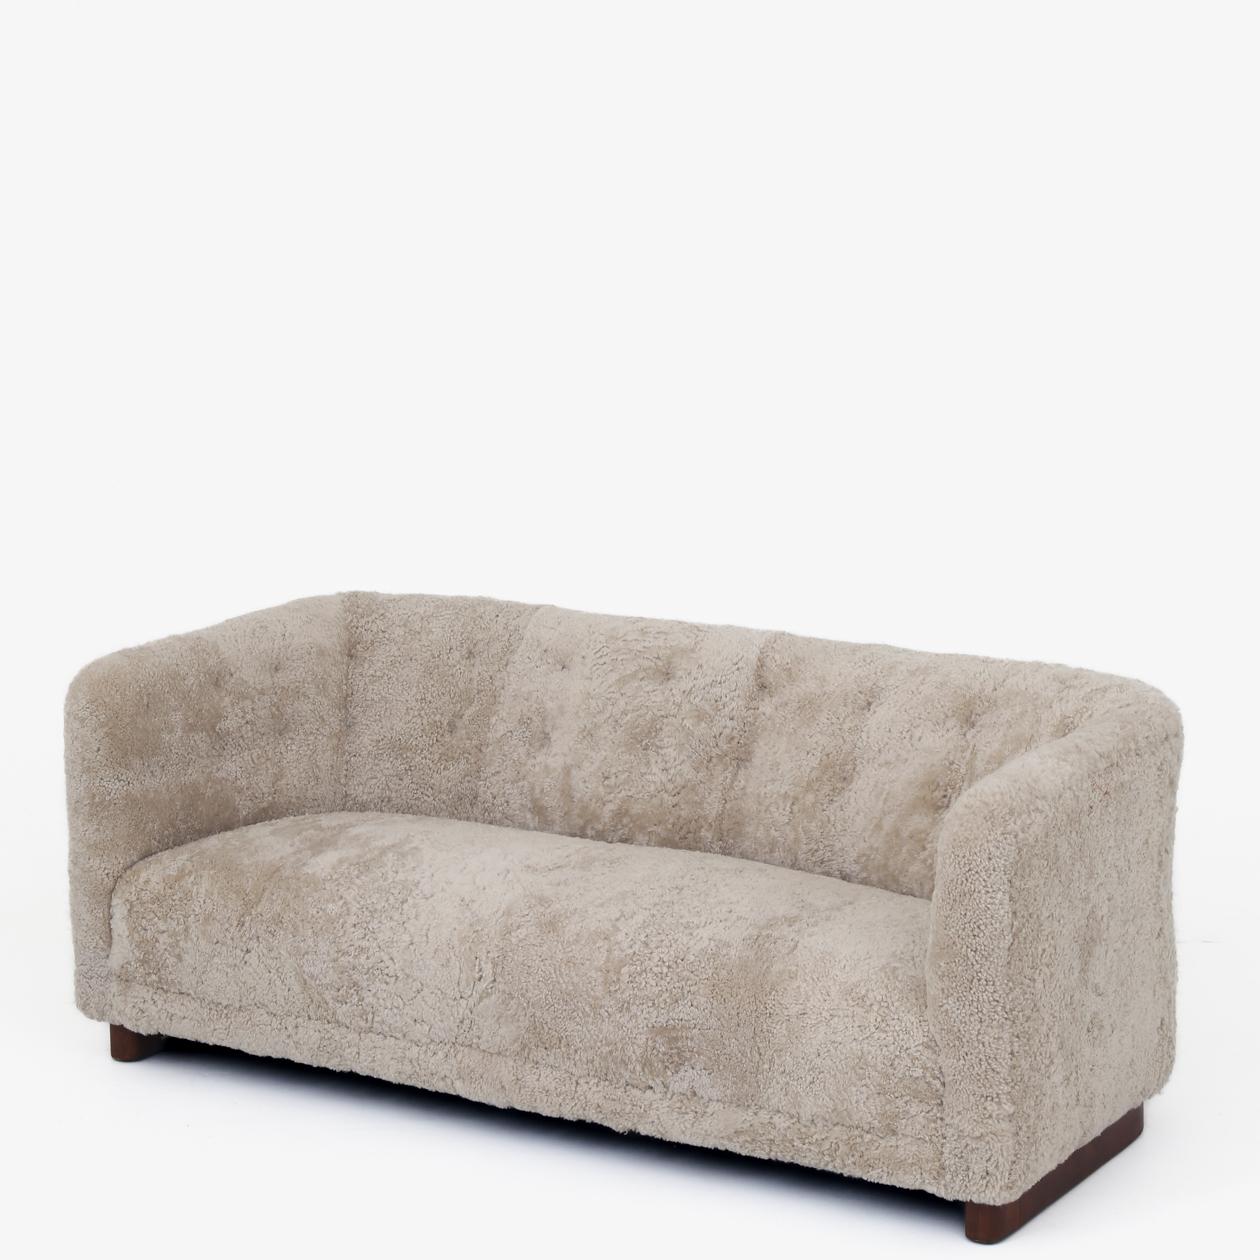 Model FH 1668 - Reupholstered sofa in new lambskin with natural leather buttons and stained beech legs. Ole Wanscher / Fritz Hansen.